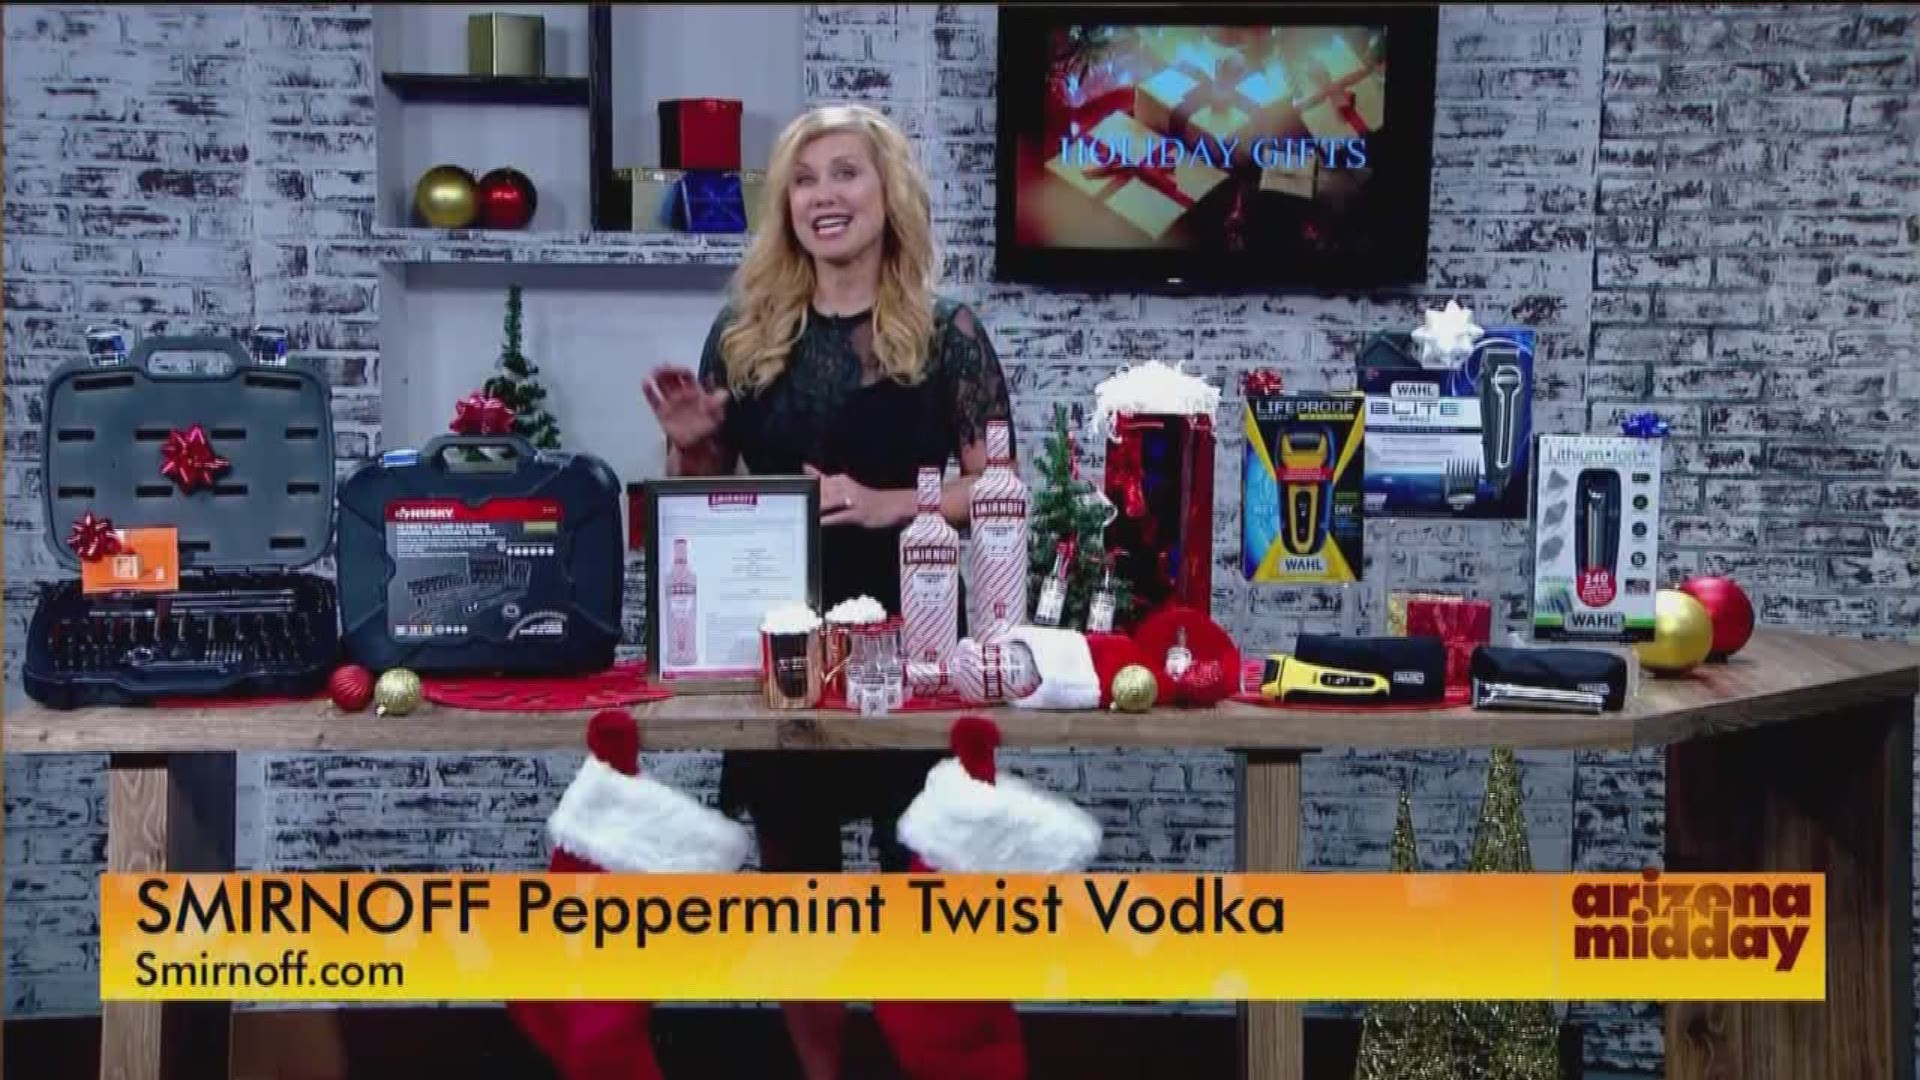 Home & Lifestyle Expert Laura Dellutri shares her holiday gift guide.